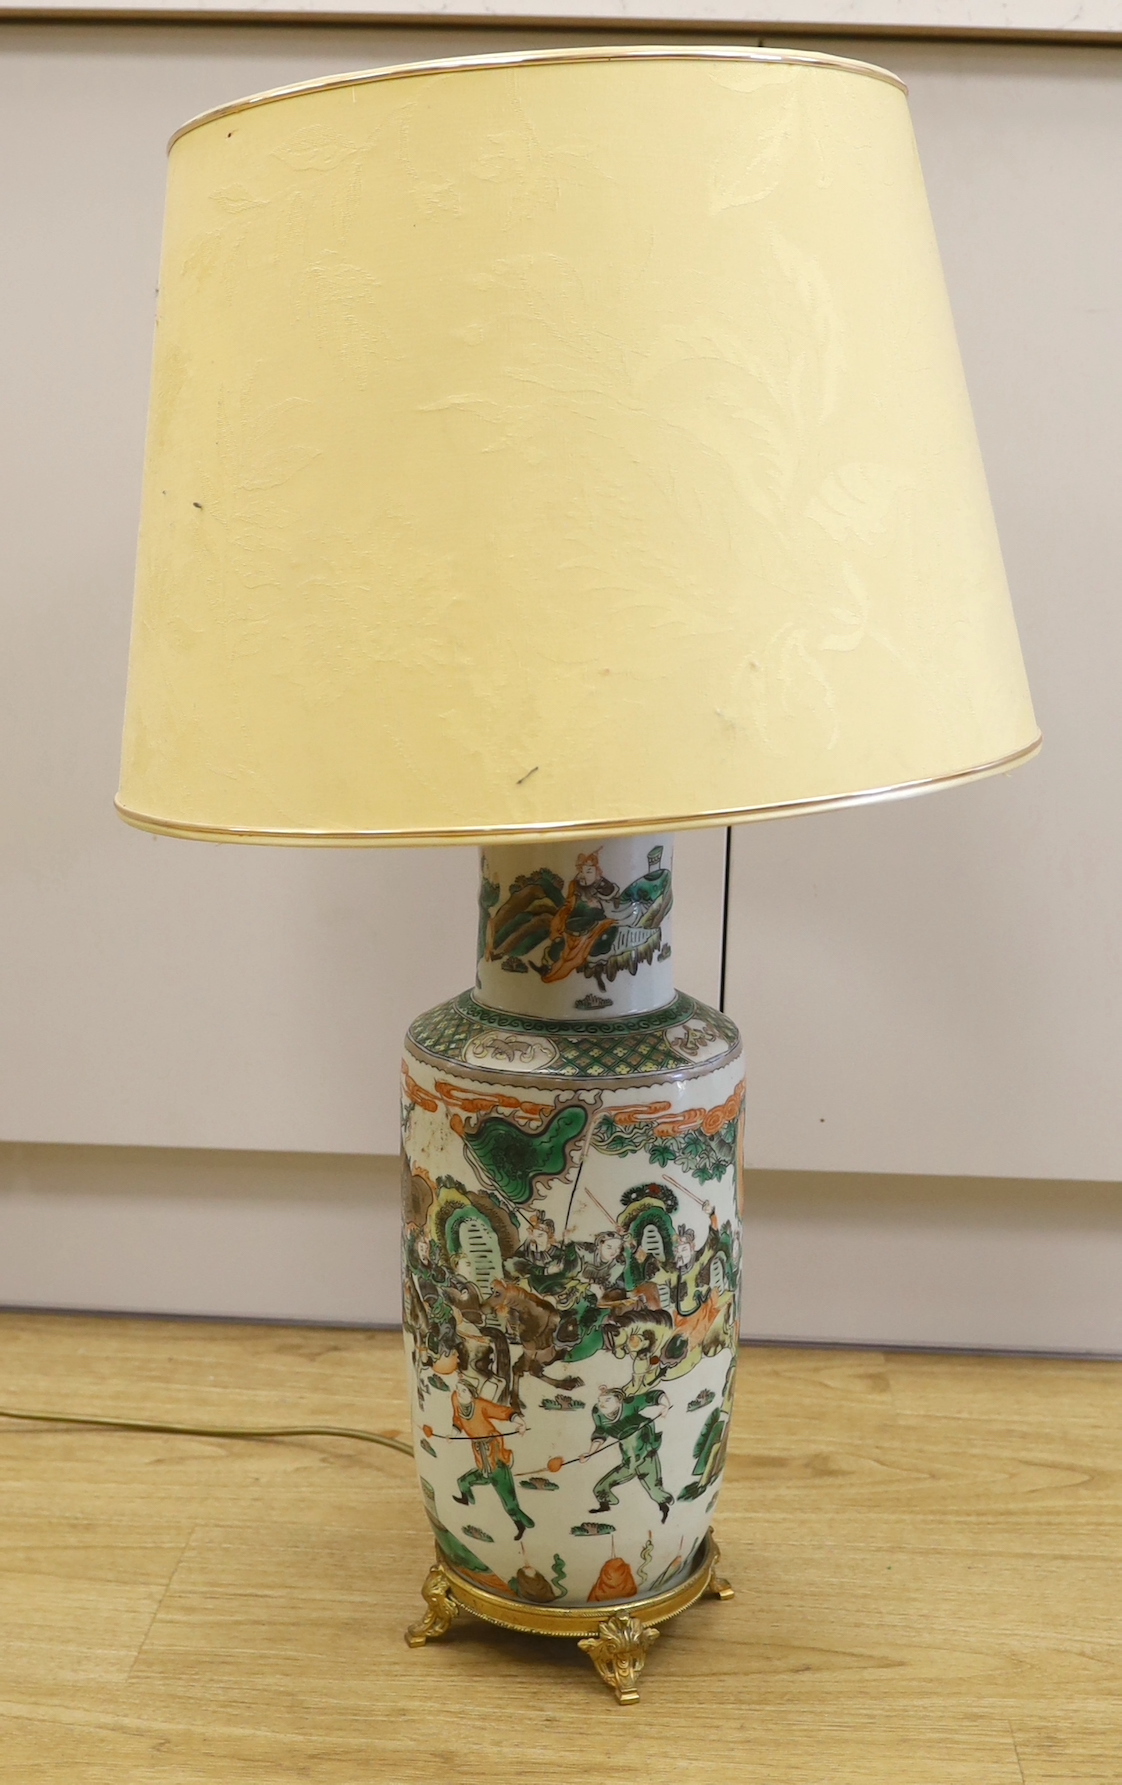 A 19th century Chinese famille verte rouleau vase with gilt metal base, now as a lamp, vase base 48cm high